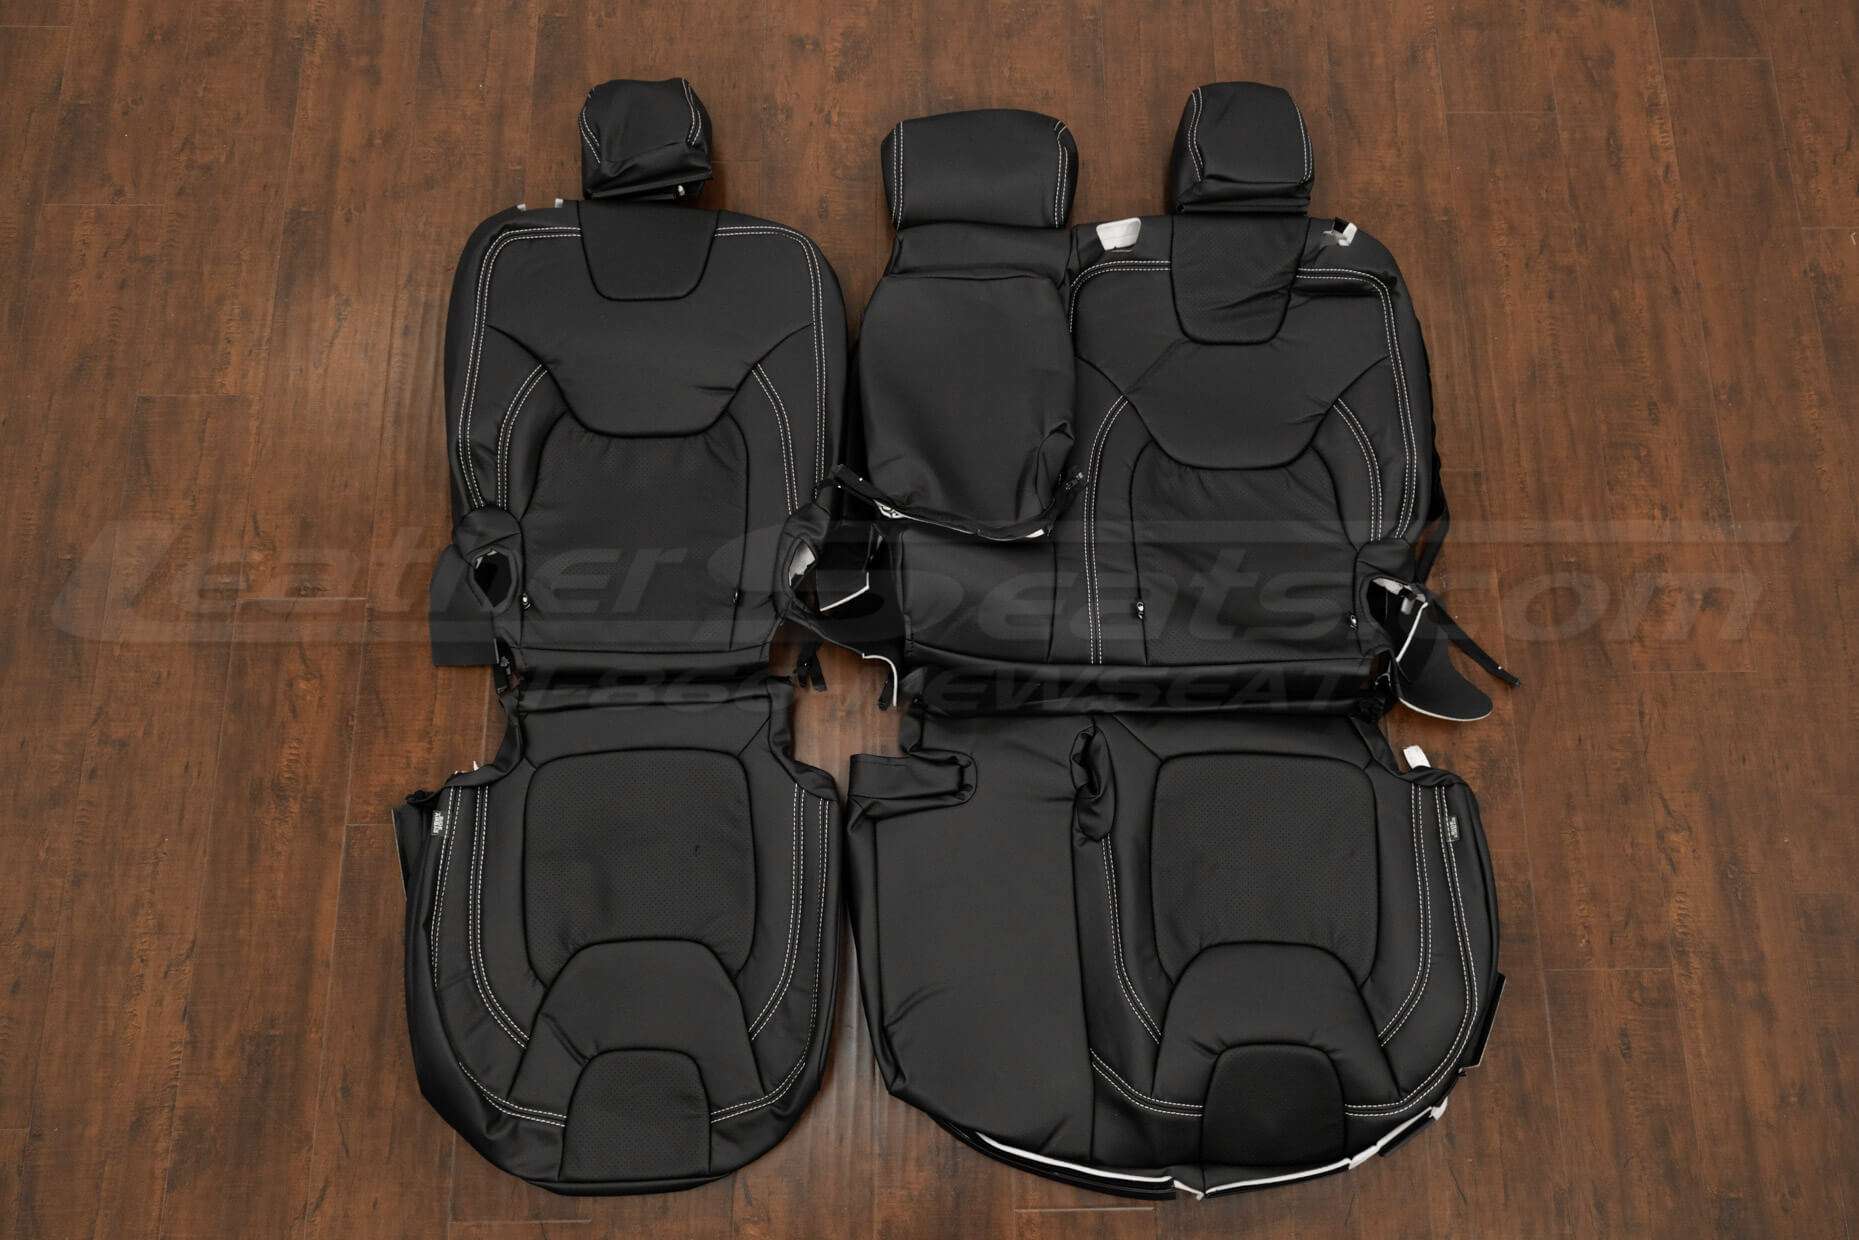 2018 Jeep Cherokee Leather Seat Kit - Blck - Rear seat upholstery with Armrest